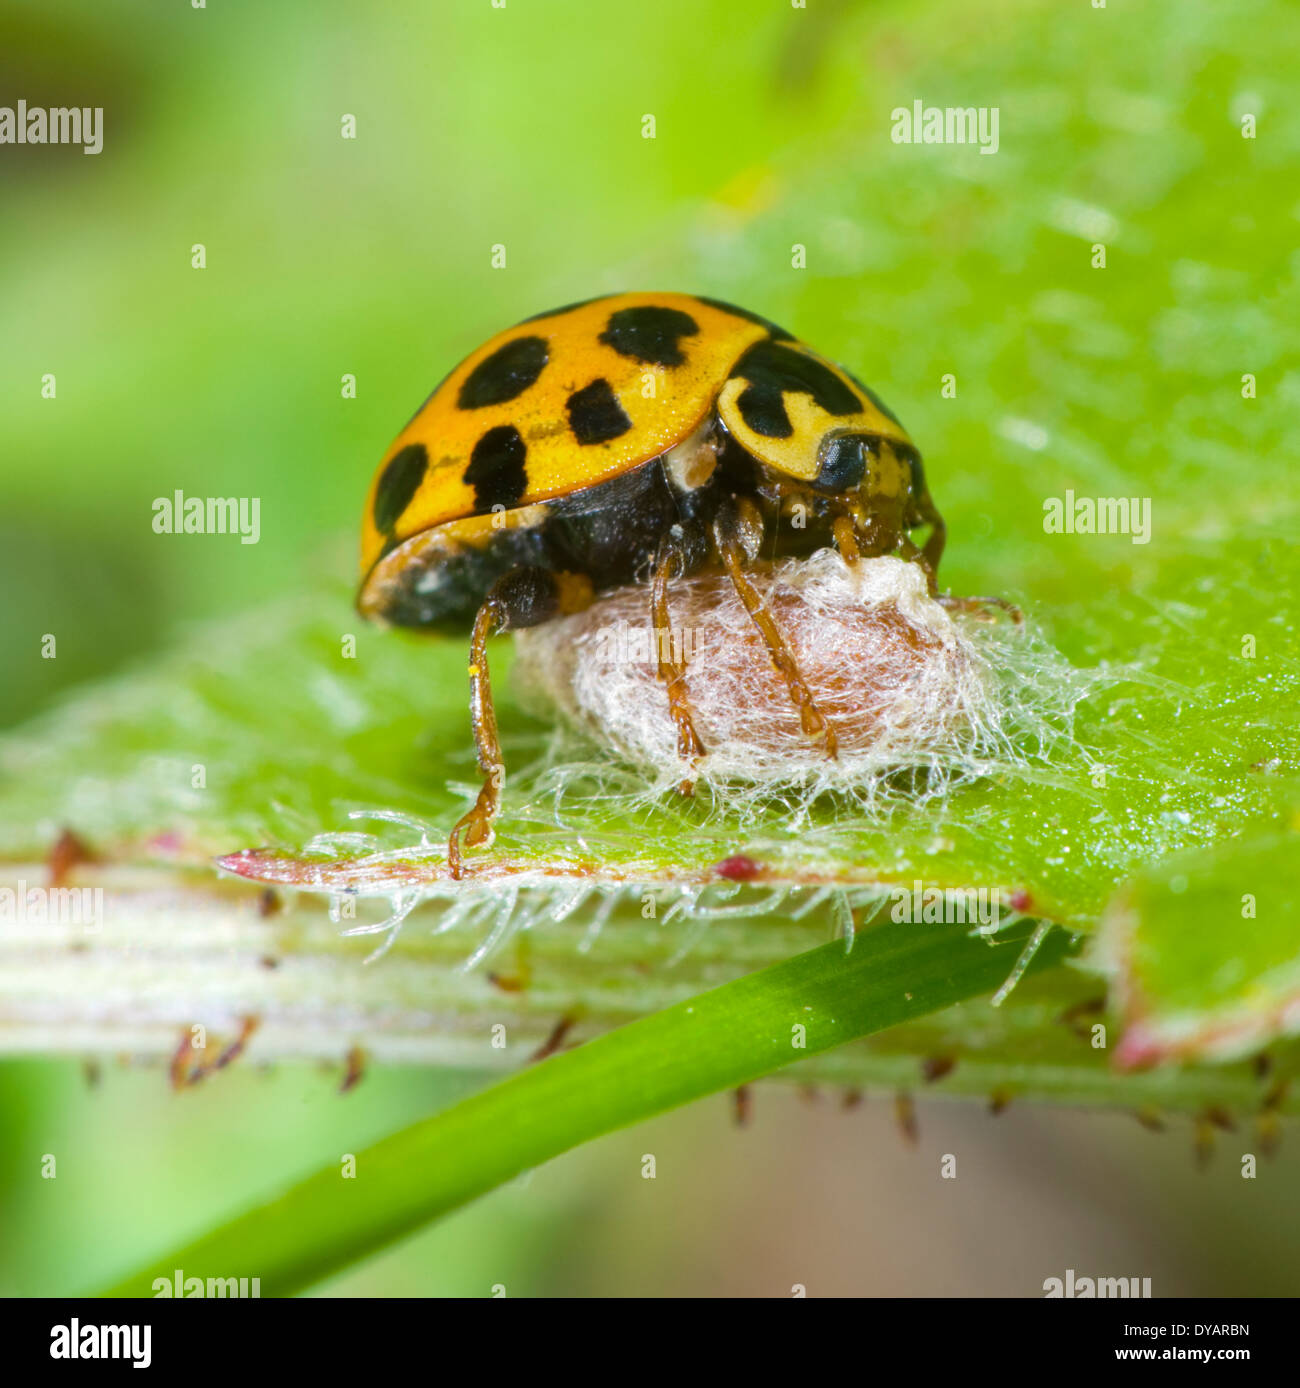 Wasp virus turned this Common Spotted Ladybird (Harmonia conformis) into a zombie babysitter. New South Wales, Australia Stock Photo